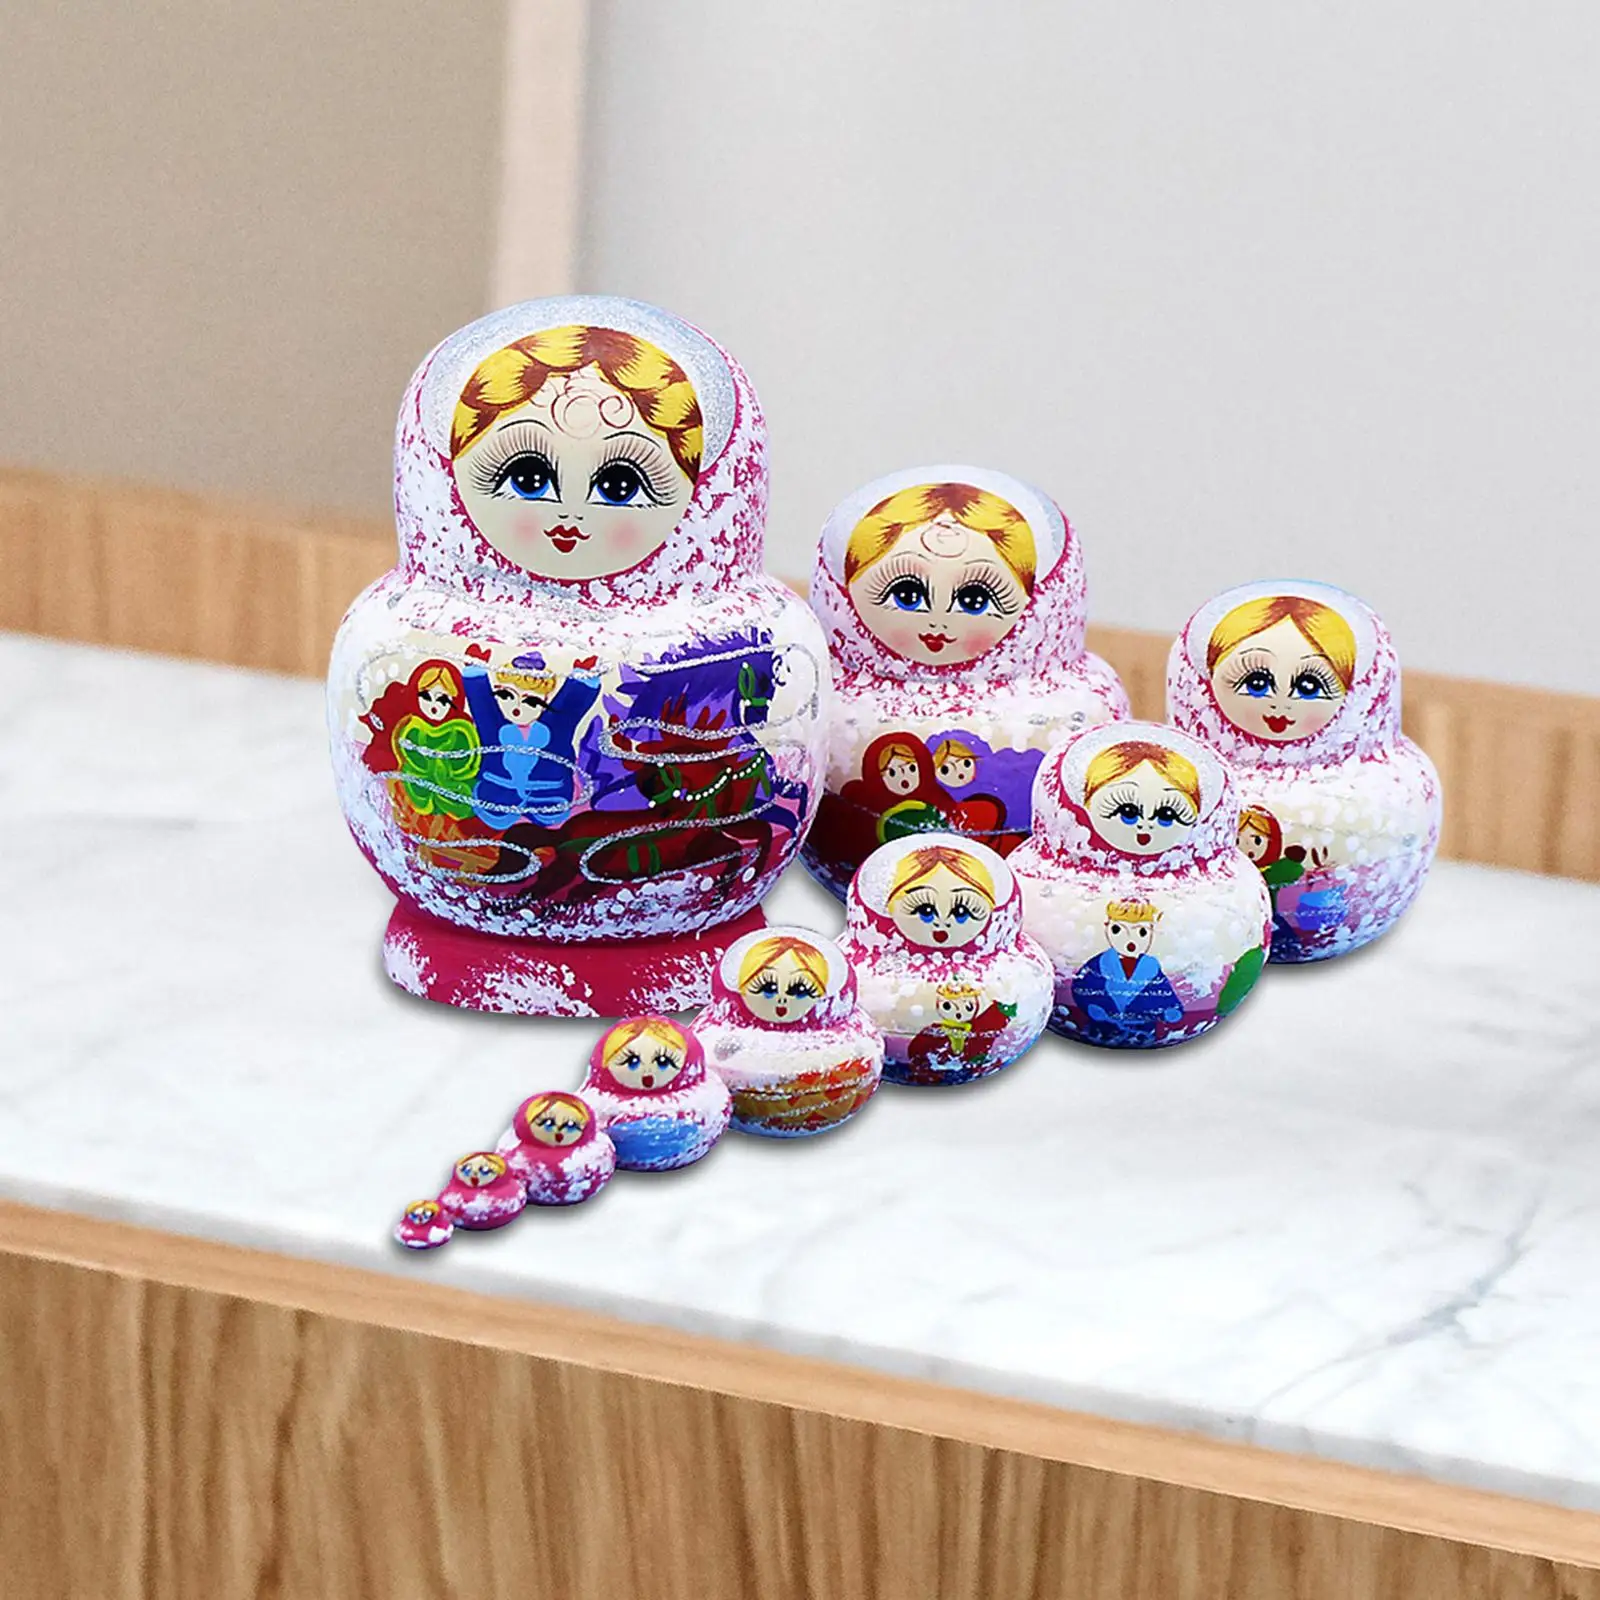 10x Nesting Doll Stackable Collectible Crafts Ornament for Home Adults Kids